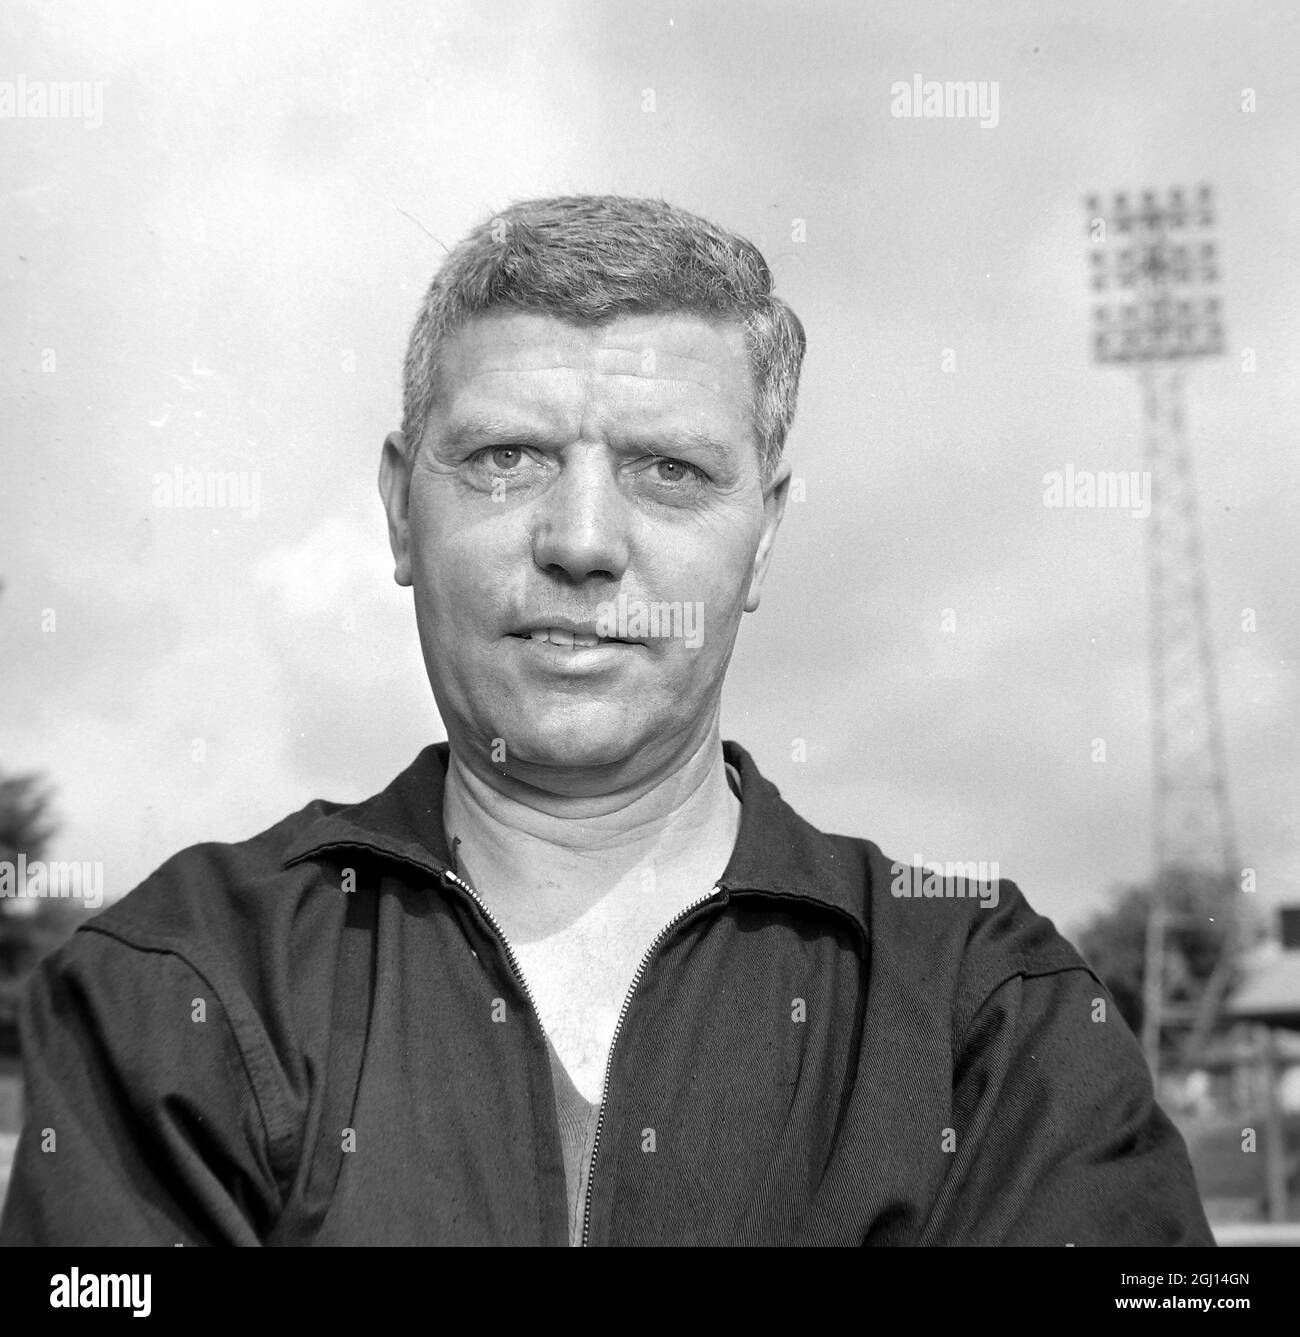 GEORGE CURTIS - PORTRAIT OF MANAGER OF BRIGHTON & HOVE FC FOOTBALL CLUB TEAM ; 9 AUGUST 1962 Stock Photo